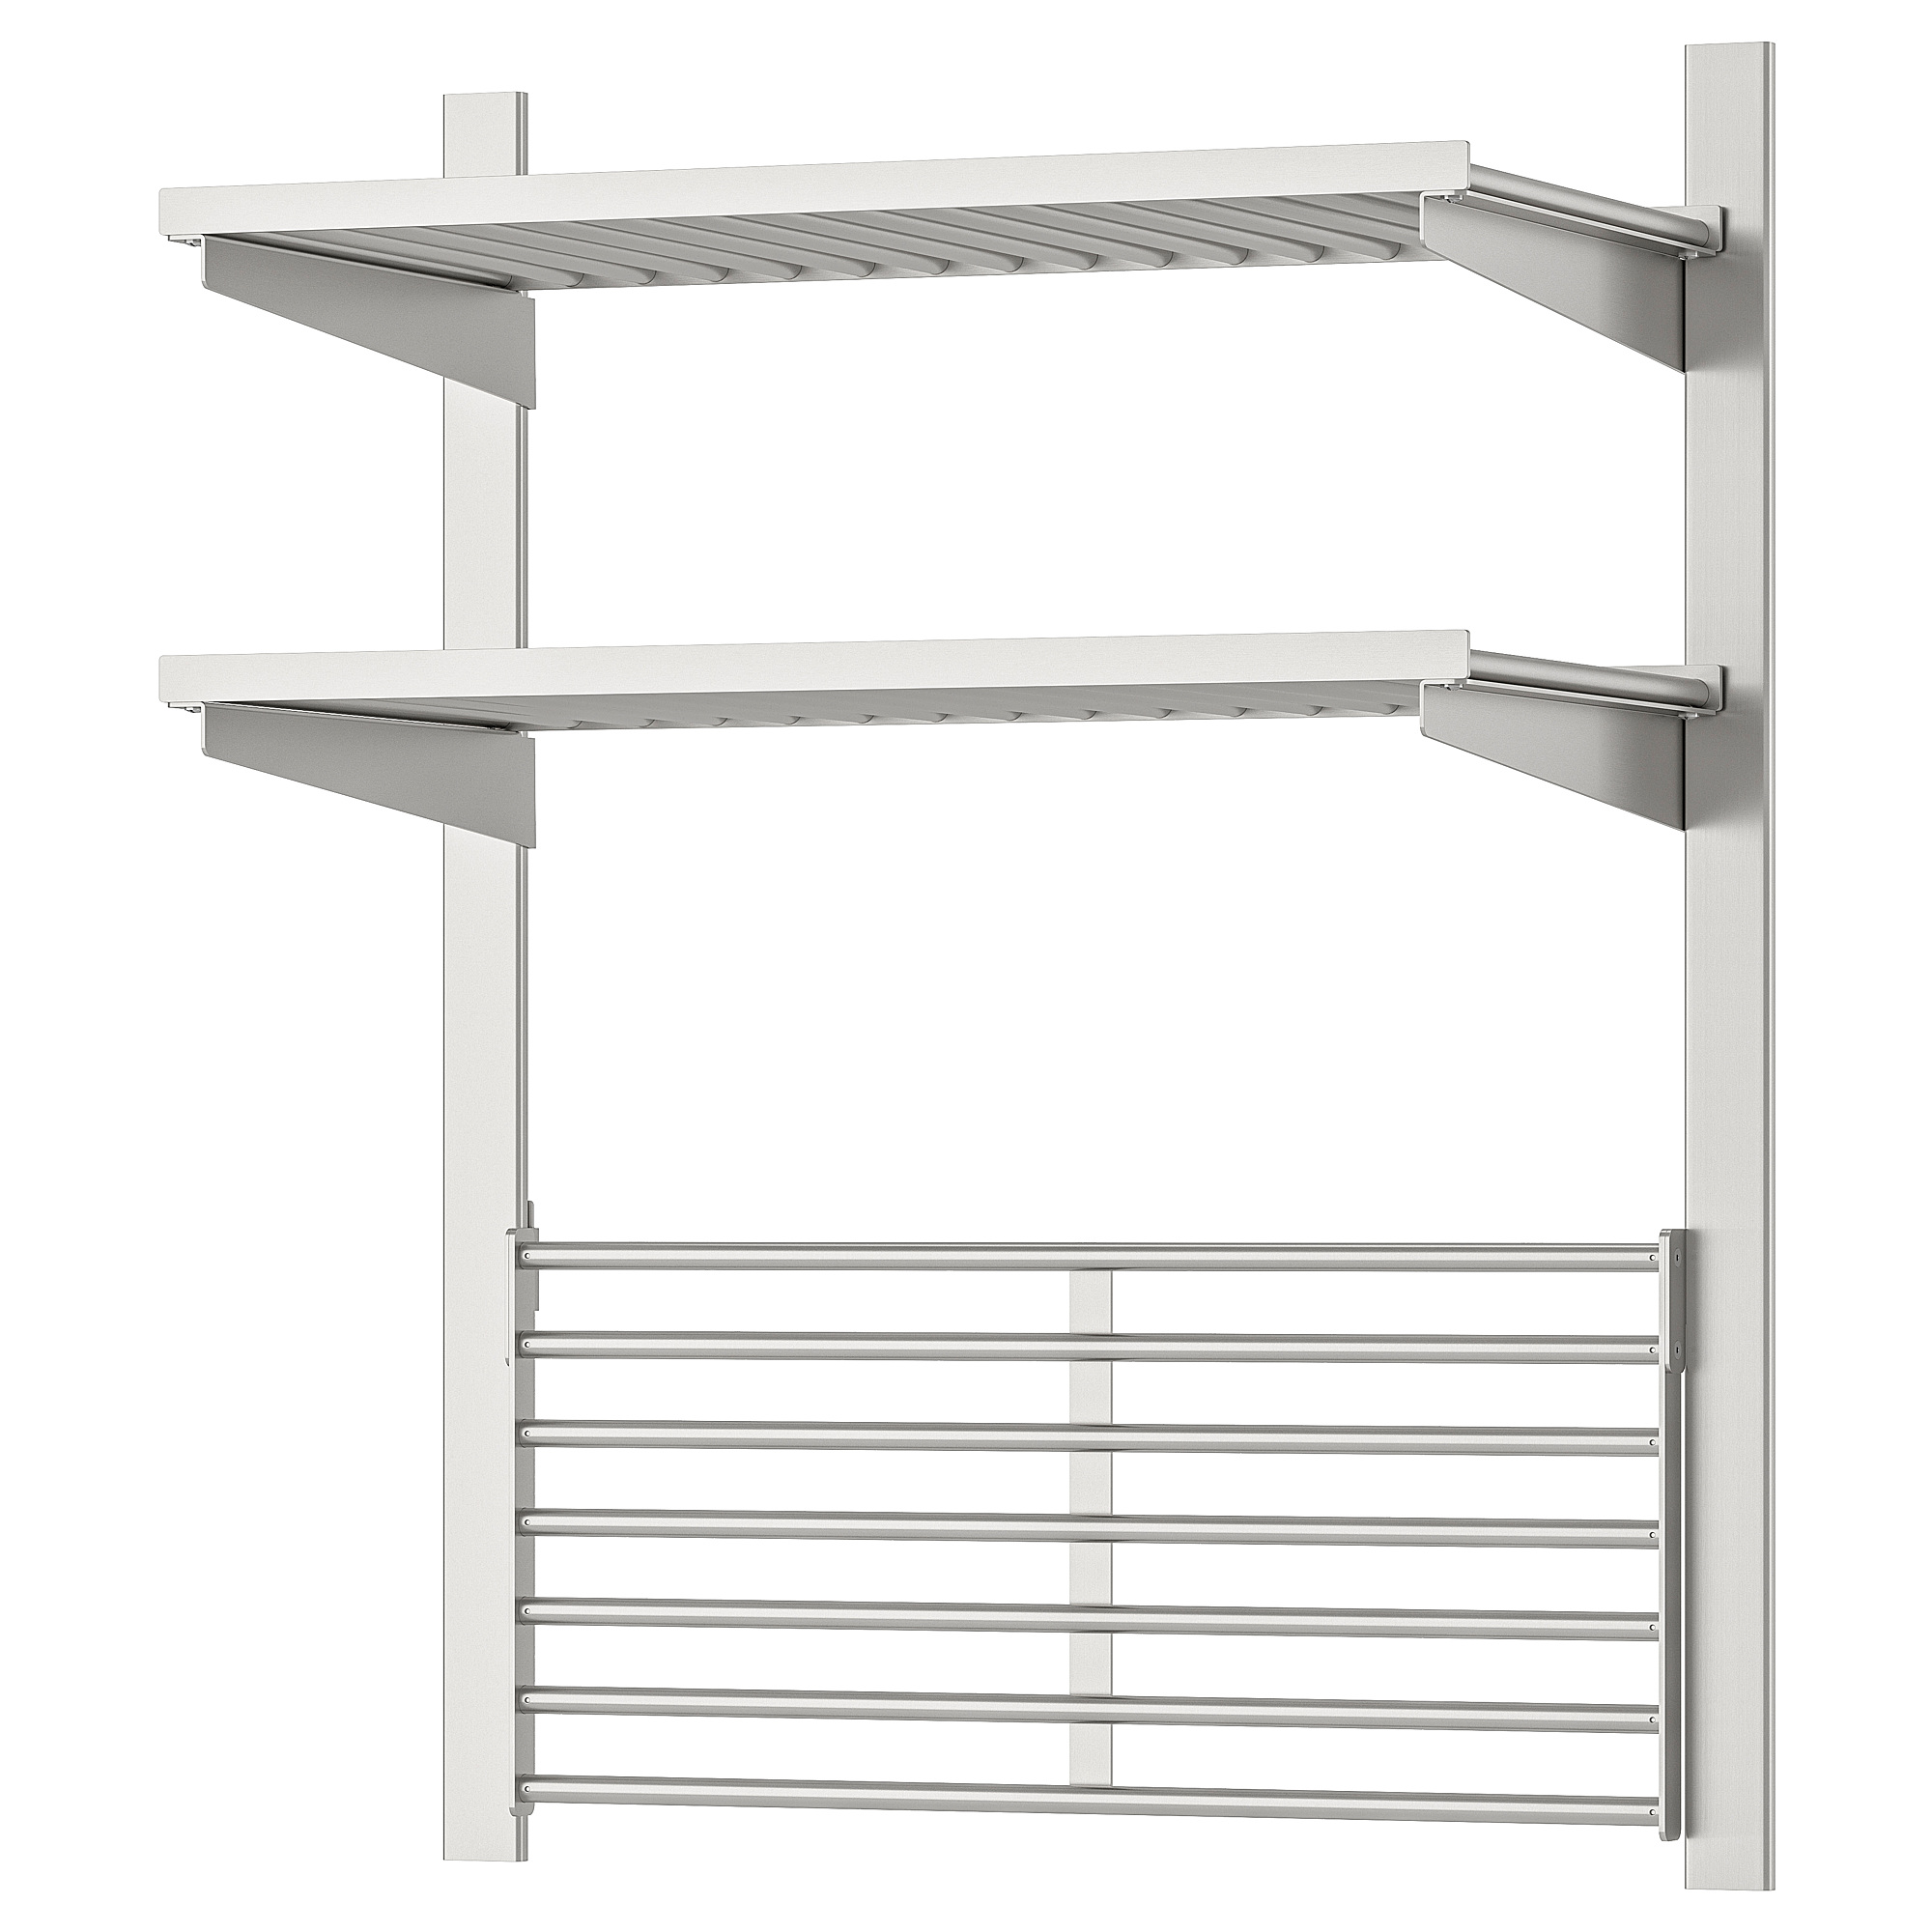 KUNGSFORS suspension rail with shelf/wll grid